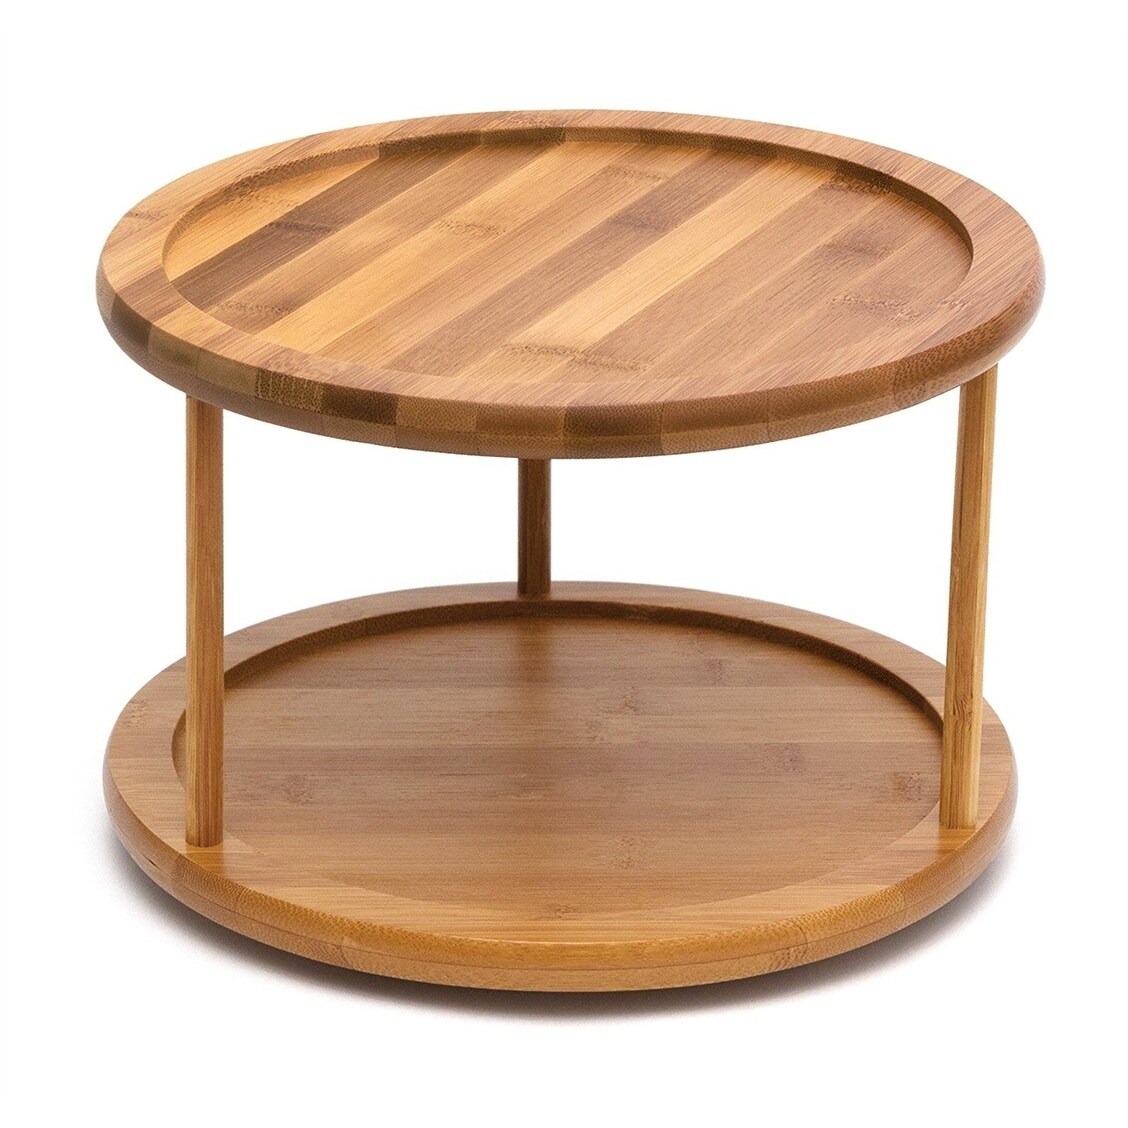 YBM HOME Bamboo Wooden Lazy Susan Turntable 17 Inch Diameter 480 